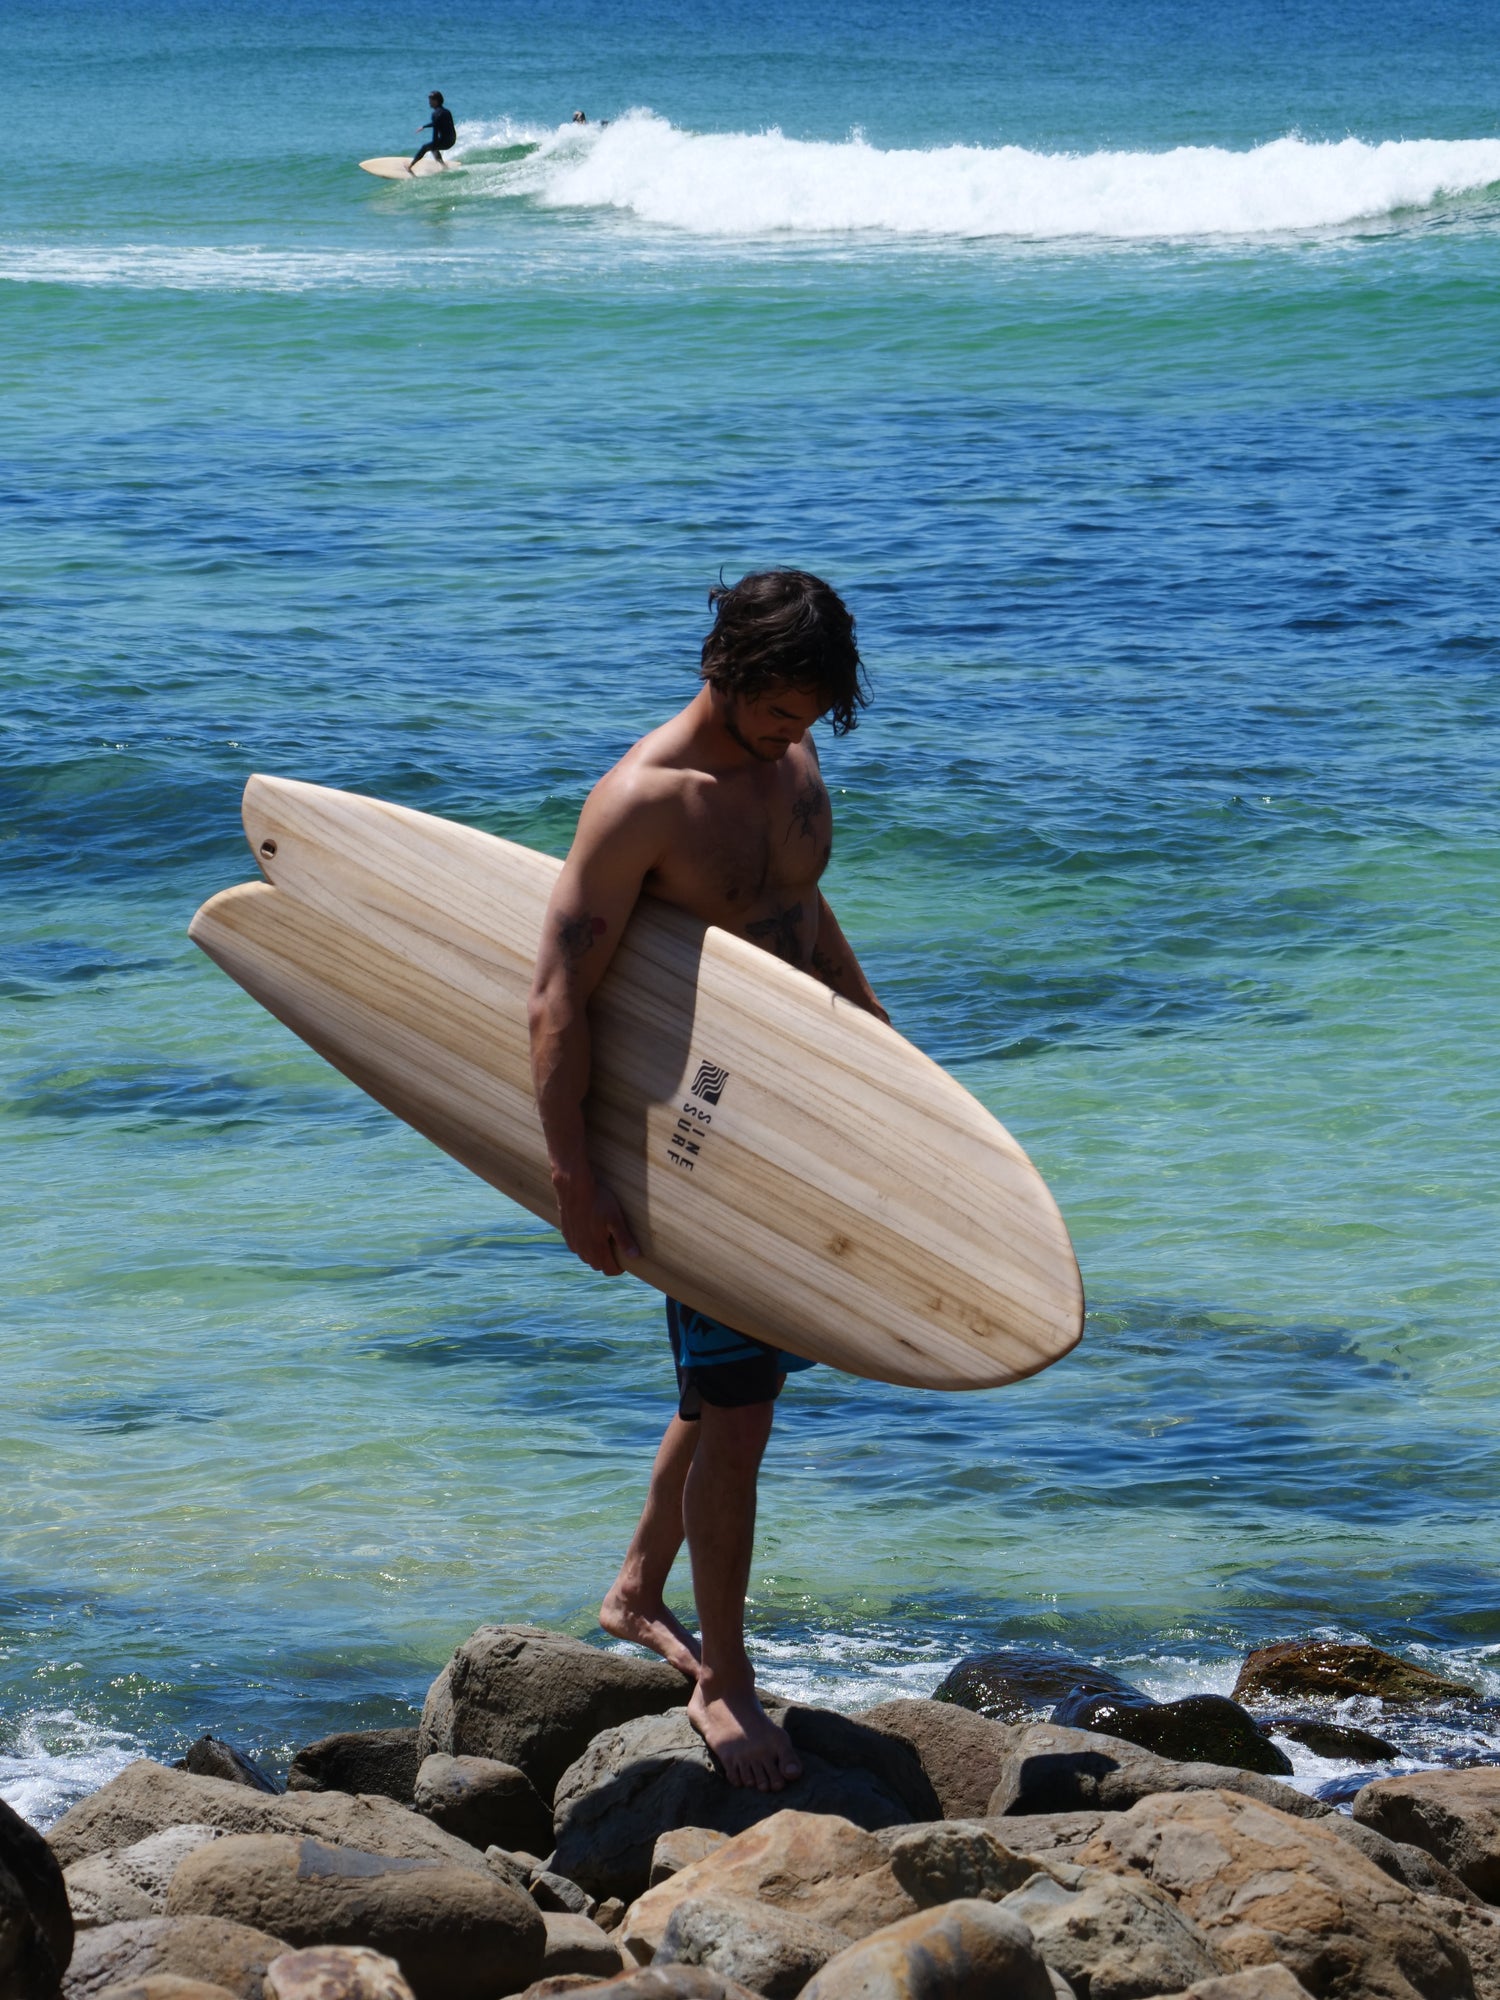 Surfer at boomerang beach holding a sustainable hollow wooden surfboard